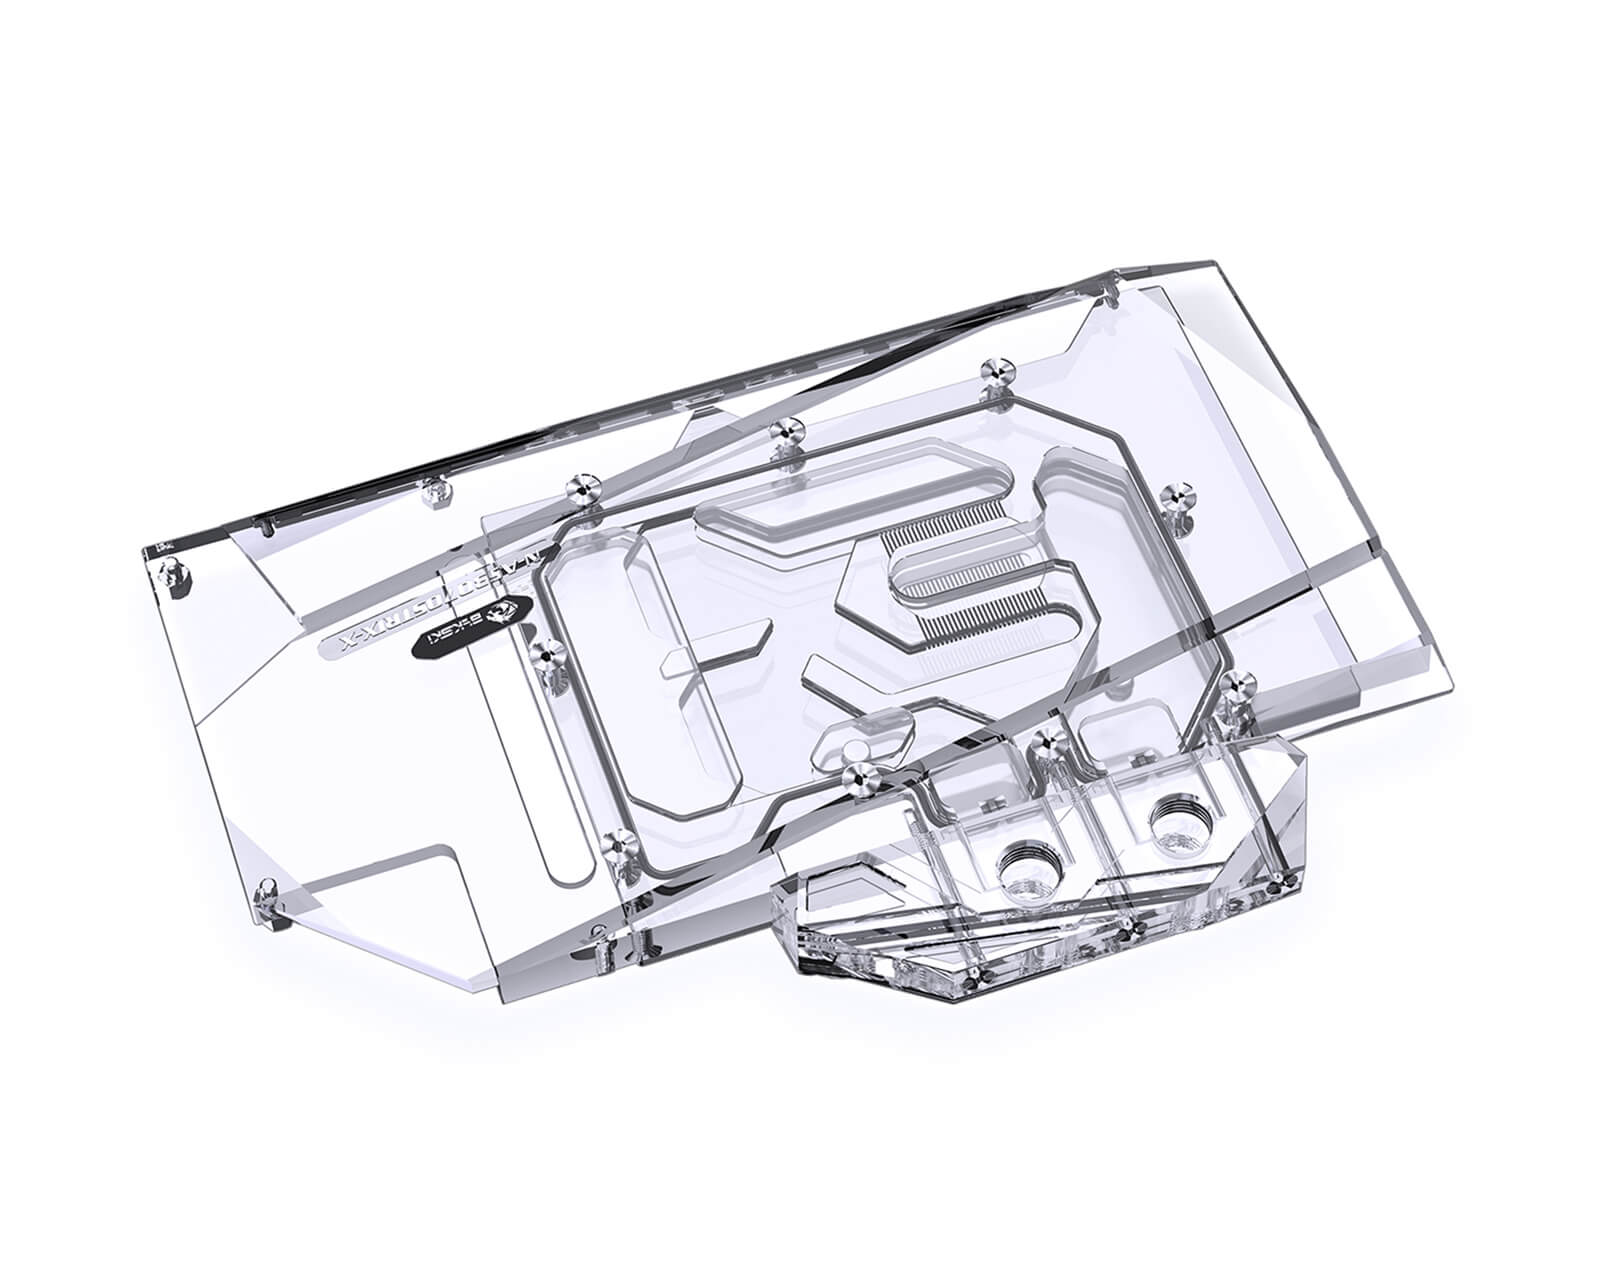 Bykski Full Coverage GPU Water Block and Backplate for ASUS RTX 3070 STRIX (N-AS3070STRIX-X) - PrimoChill - KEEPING IT COOL